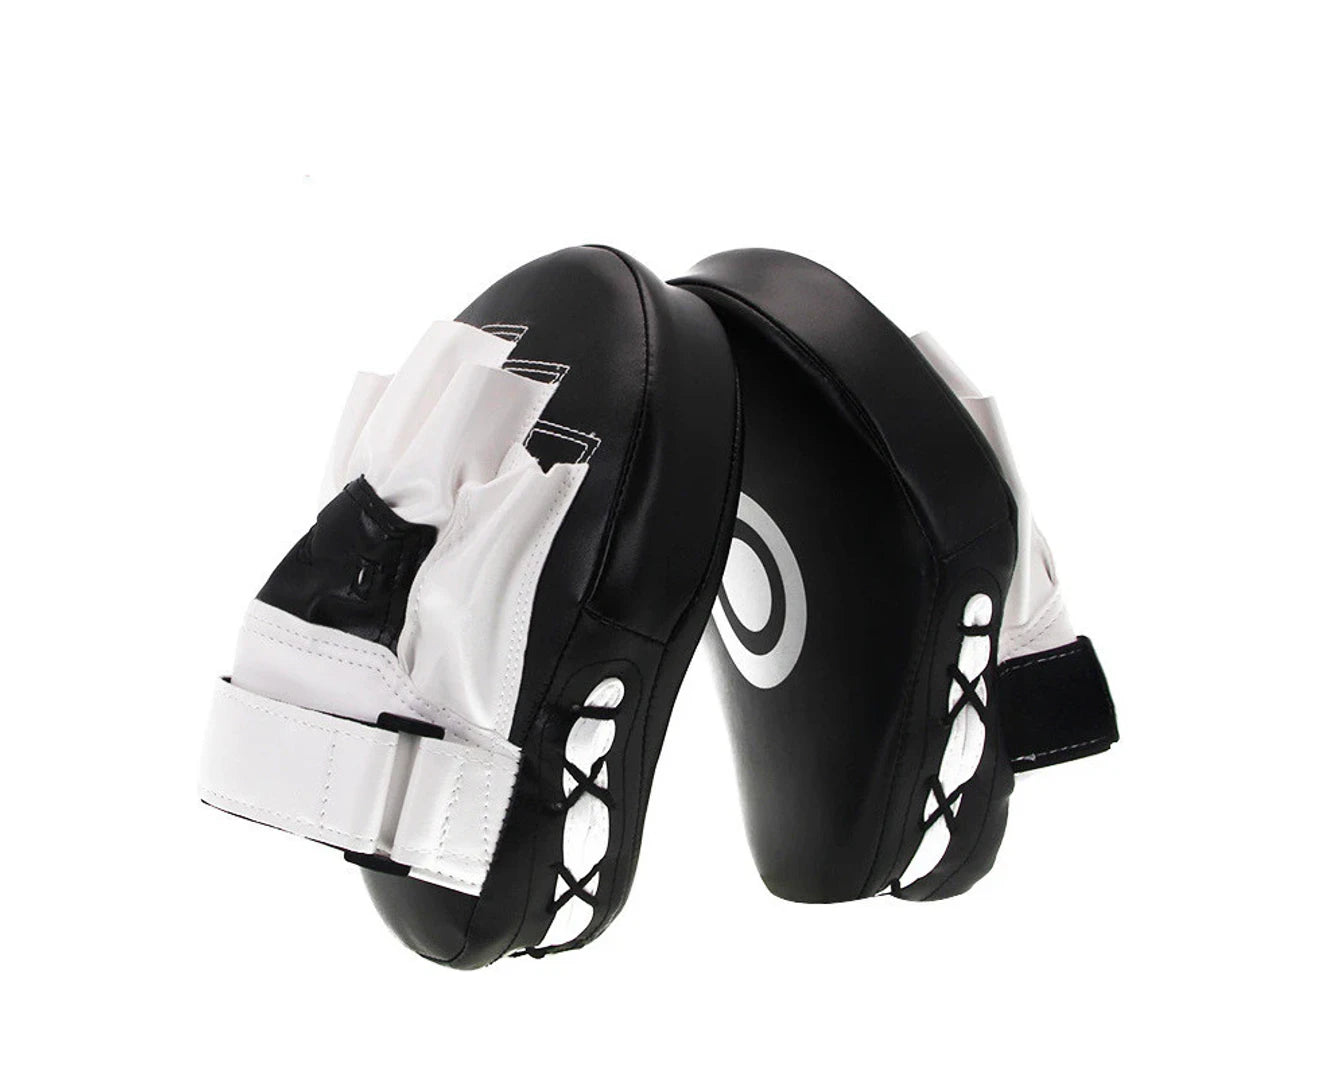 Boxing Curved Focus Punching Mitts Thickening Leatherette Training Hand Pads for Karate Gym